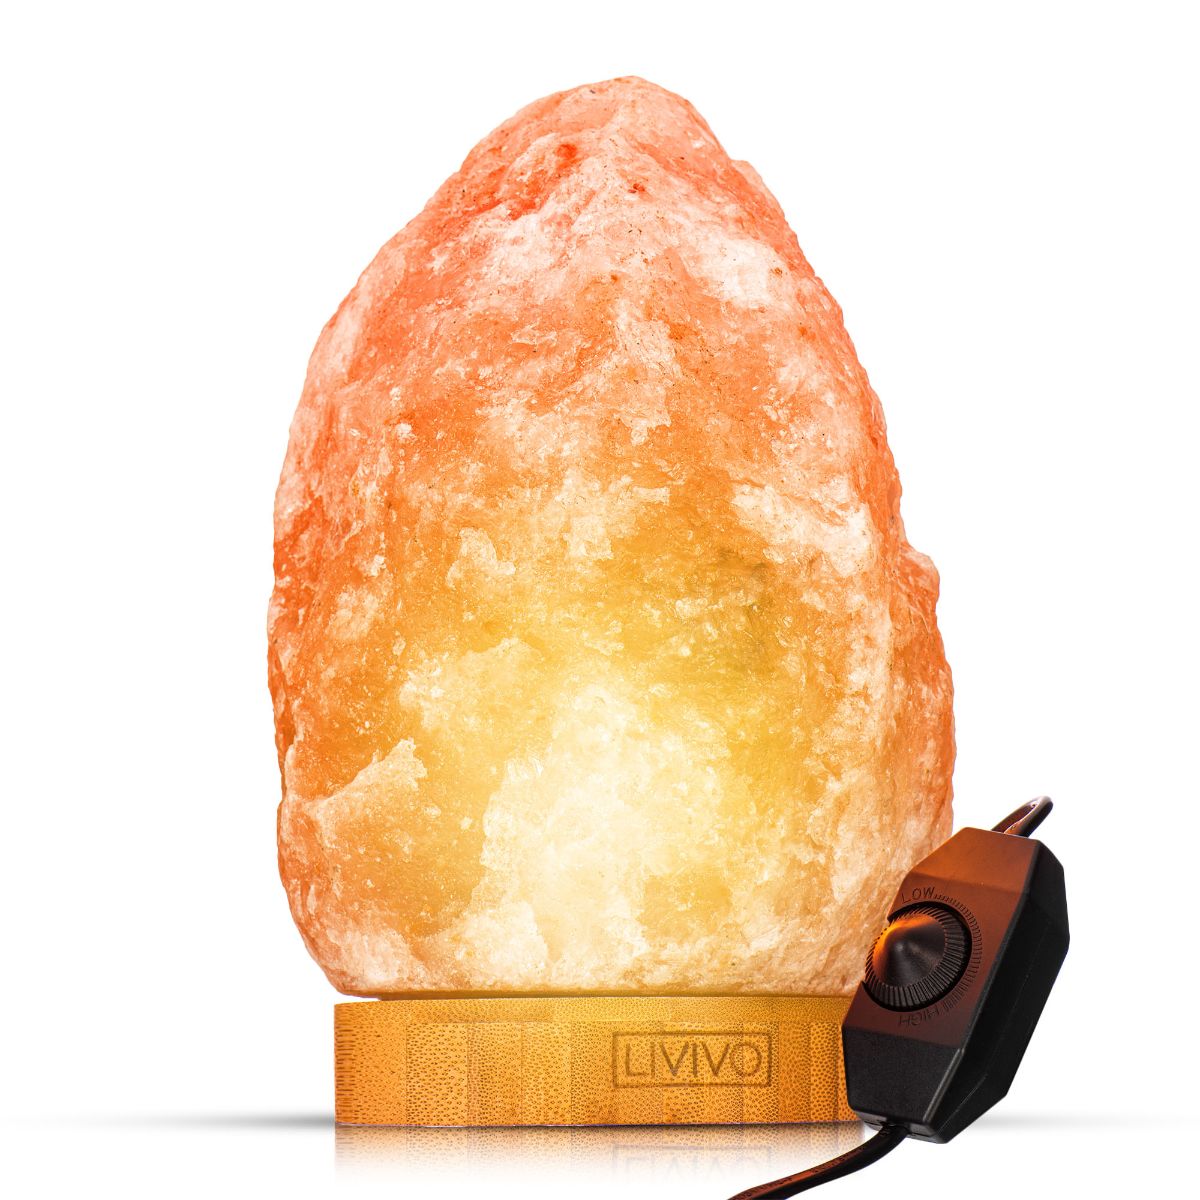 Healing Crystals Lava Lamp Fire Basket Mood Light with UK Dimmer Switch Cable /& 2 x Bulb Premium Quality 6 Himalayan Salt Lamp Fire Bowl with Himalayan Rock Salt Chunks